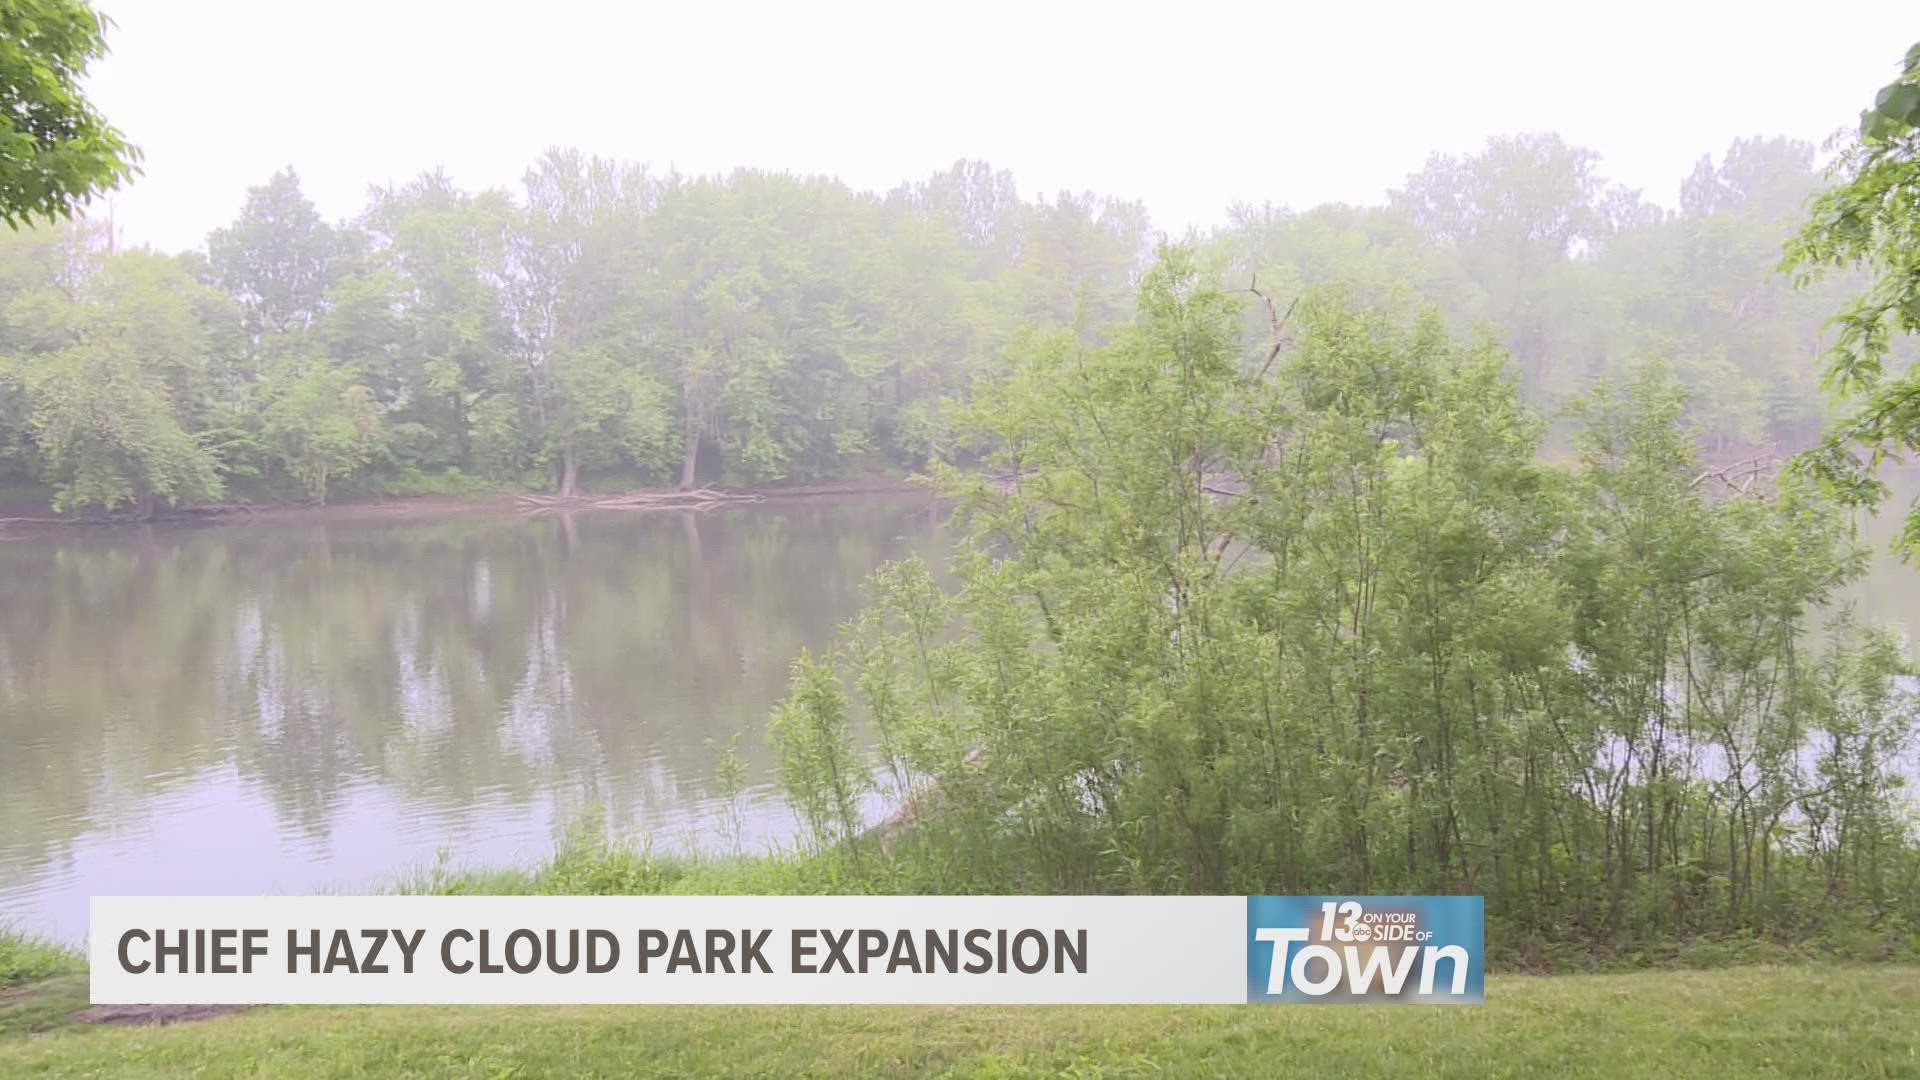 Last year the county announced it was expanding the park to nearly 400 acres.